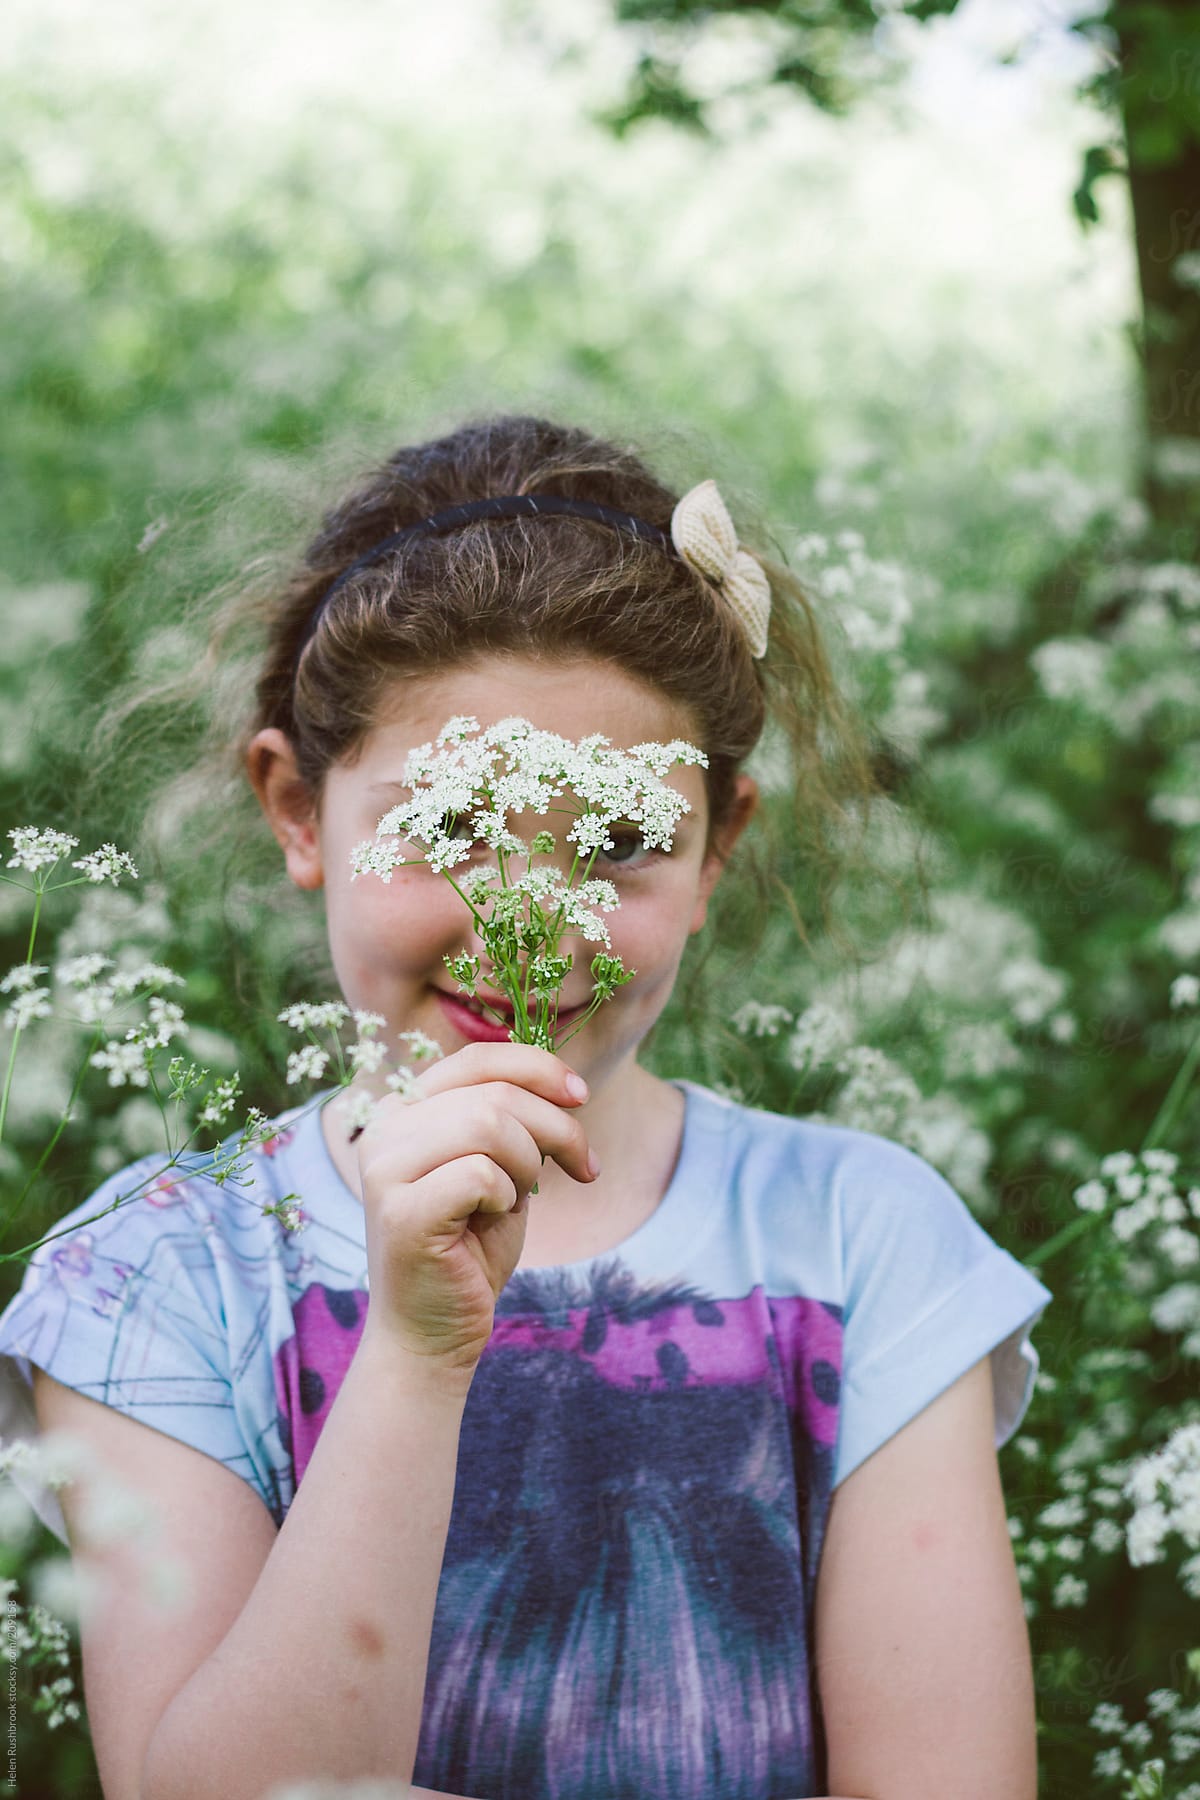 A little girl holding a sprig of flowers in front of her face